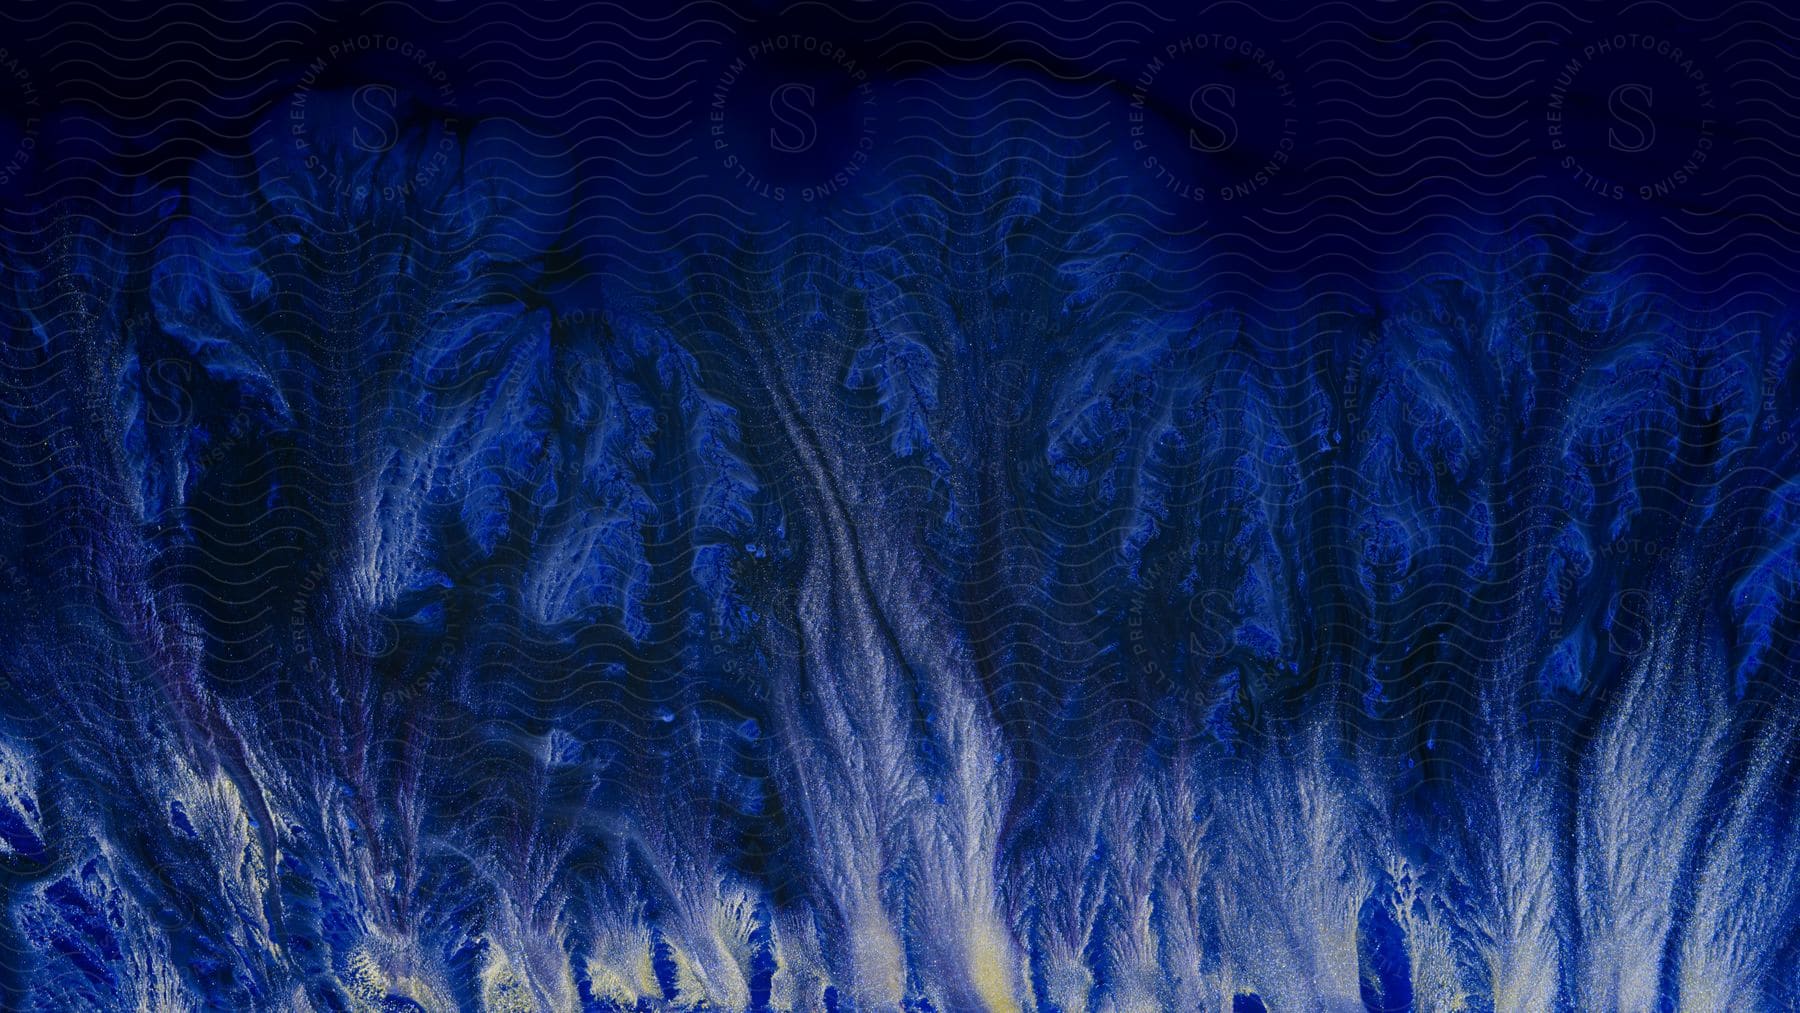 Abstract digital art of blue and white liquid mixing and flowing upwards, creating vein-like patterns.